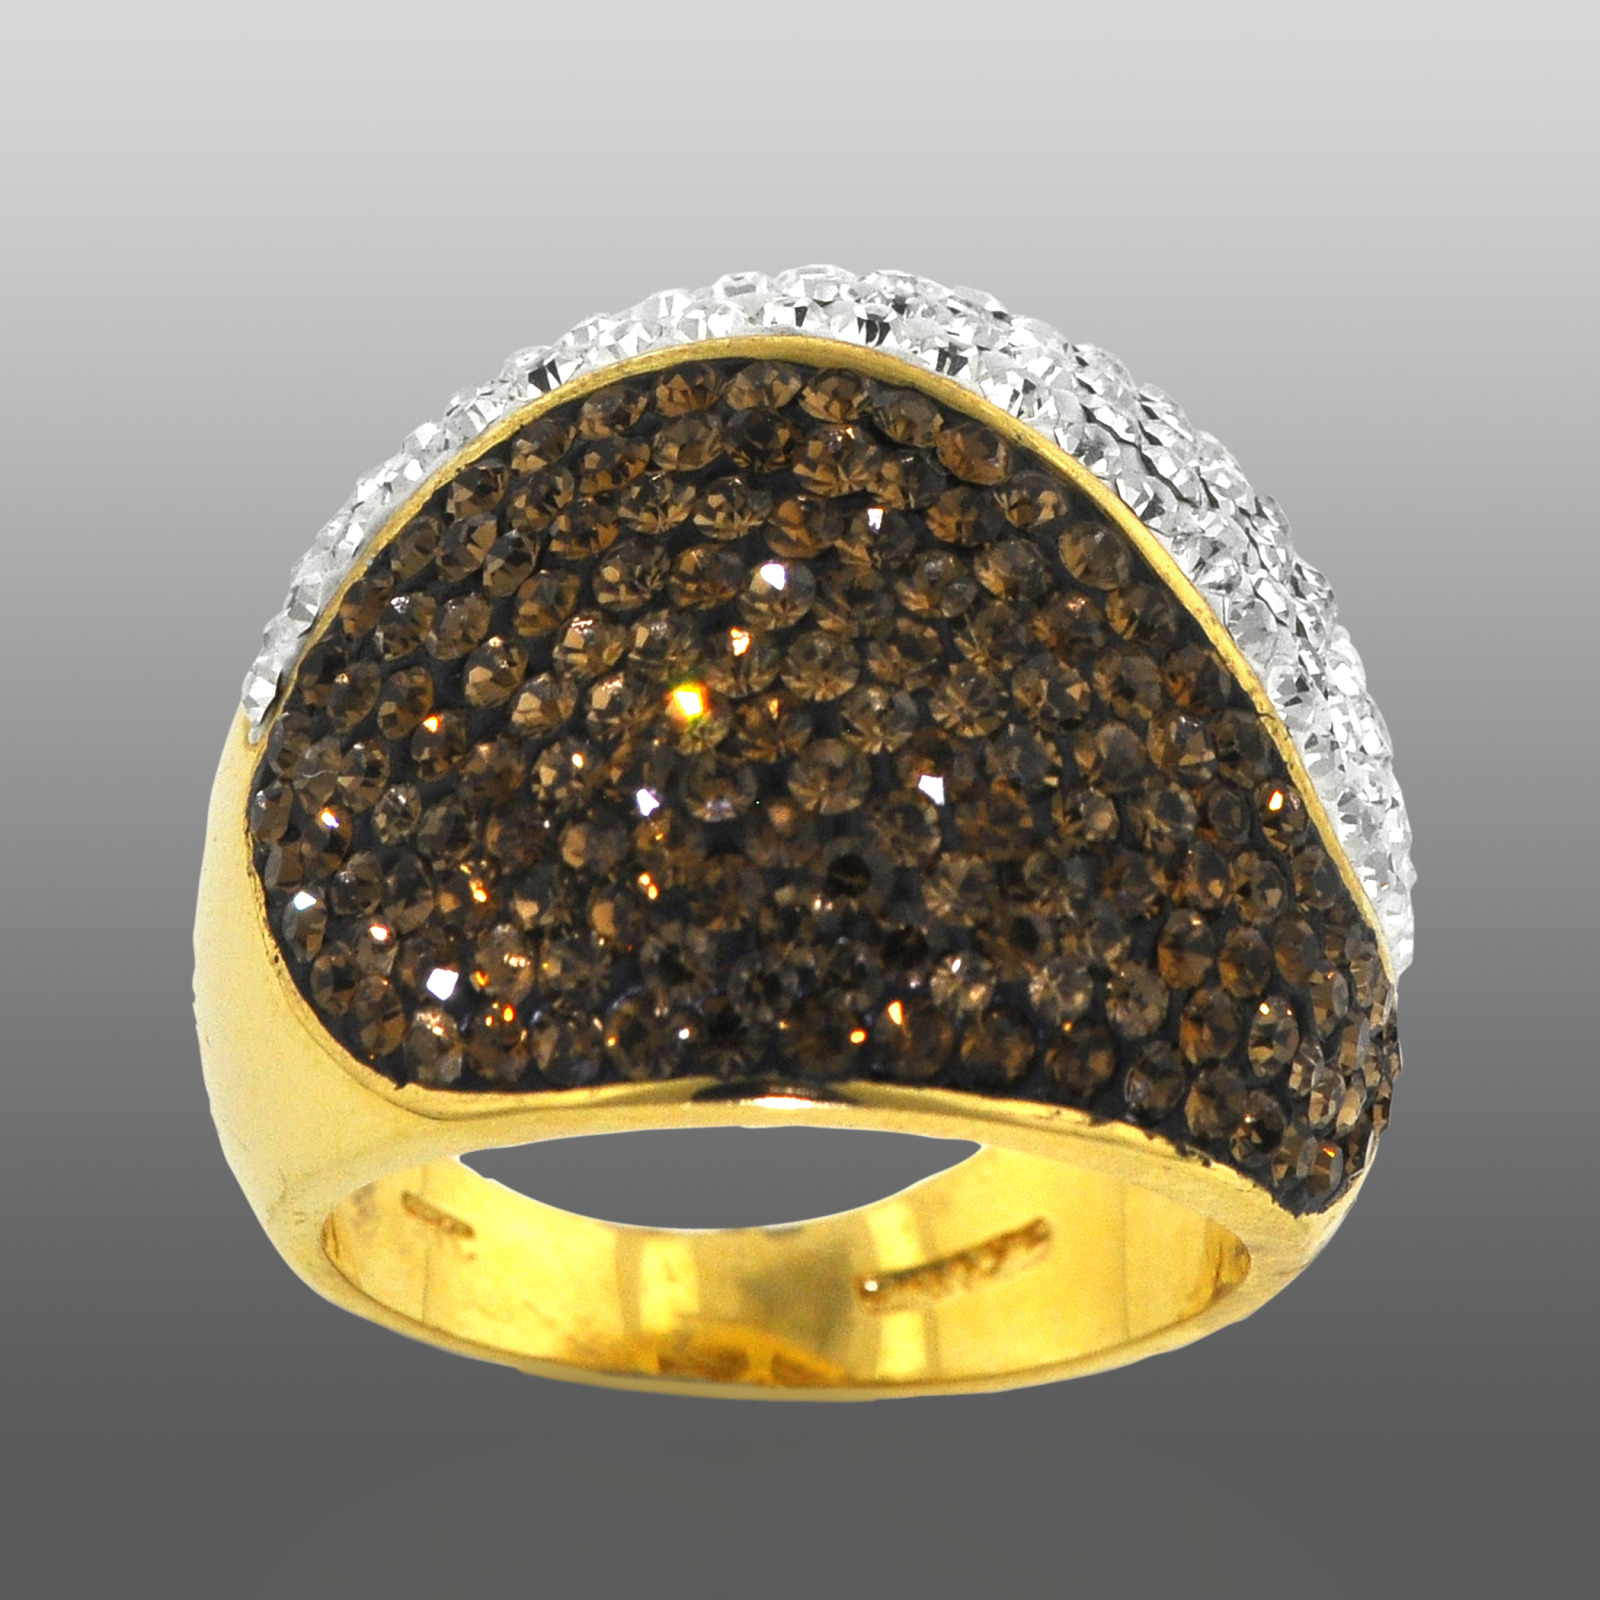 Shades Of Elegance Gold Over Bronze Brown & White Crystal Dome Ring